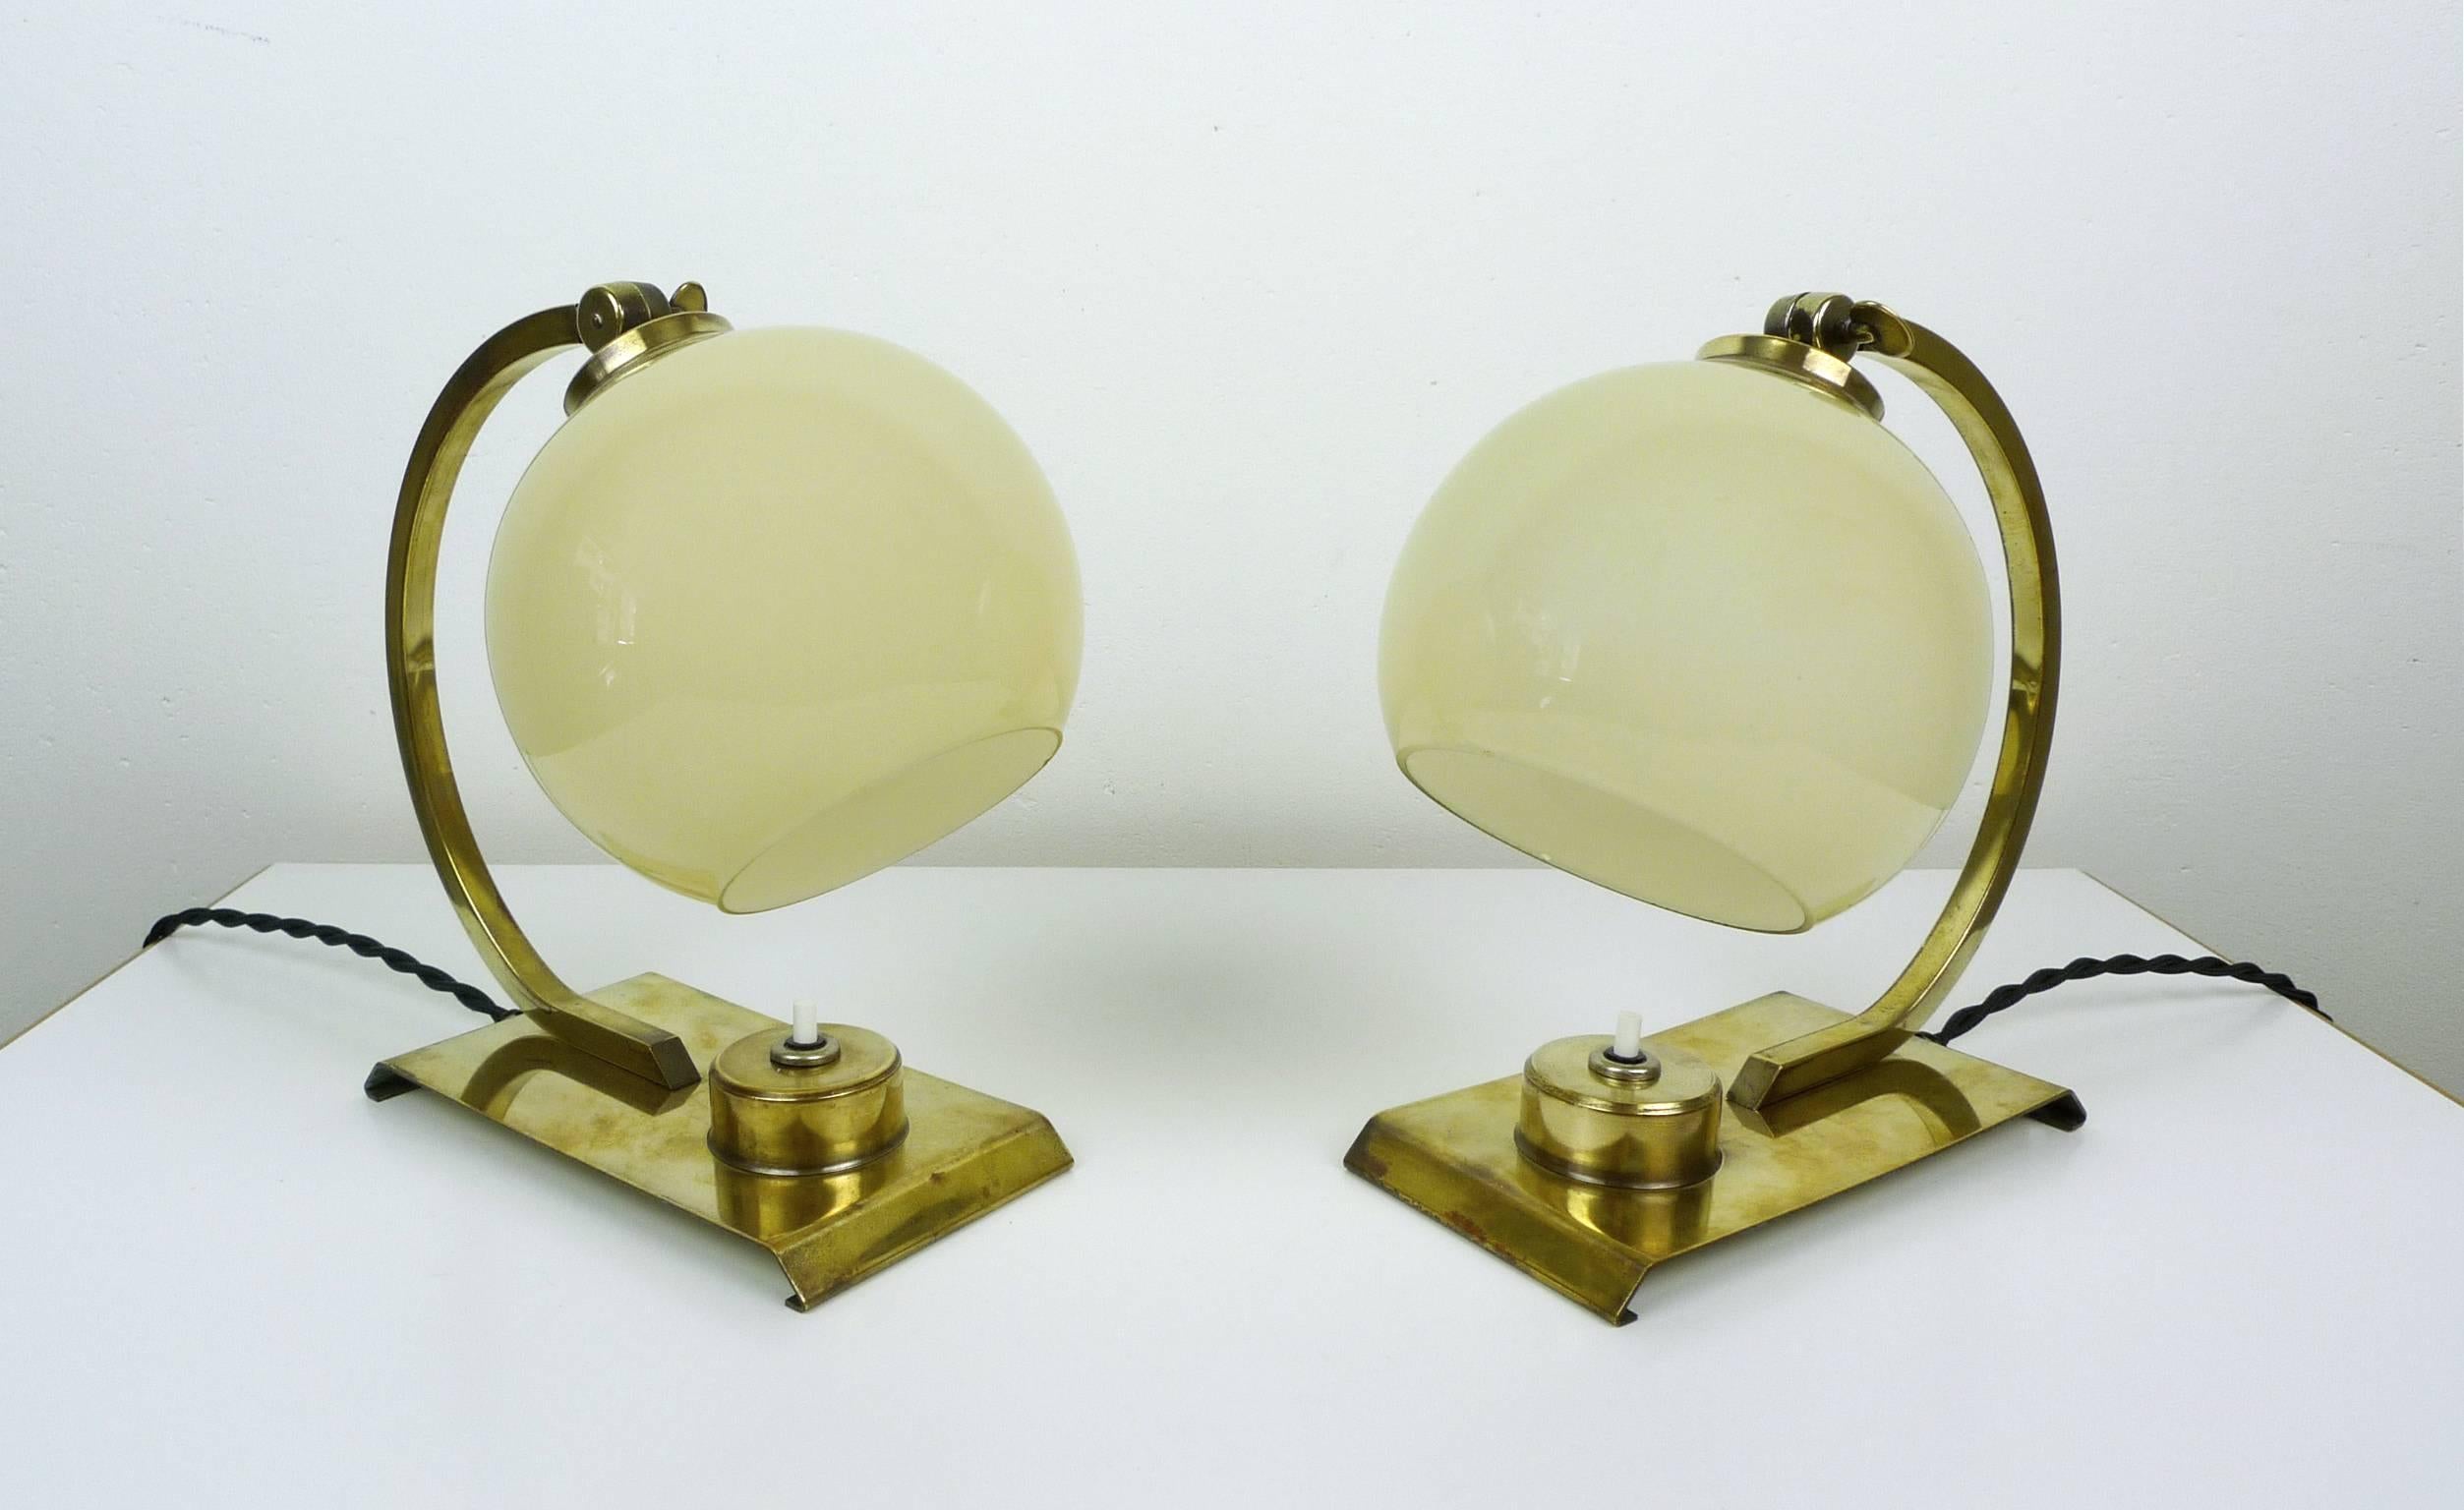 Two Art Deco table lamps from the 1930s with beige glass screens. Stand and bracket are made of brass.
The inclination of the ball screen can be adjusted by a small wing screw at the upper end of the bracket. Each lamp has a pressure switch on the